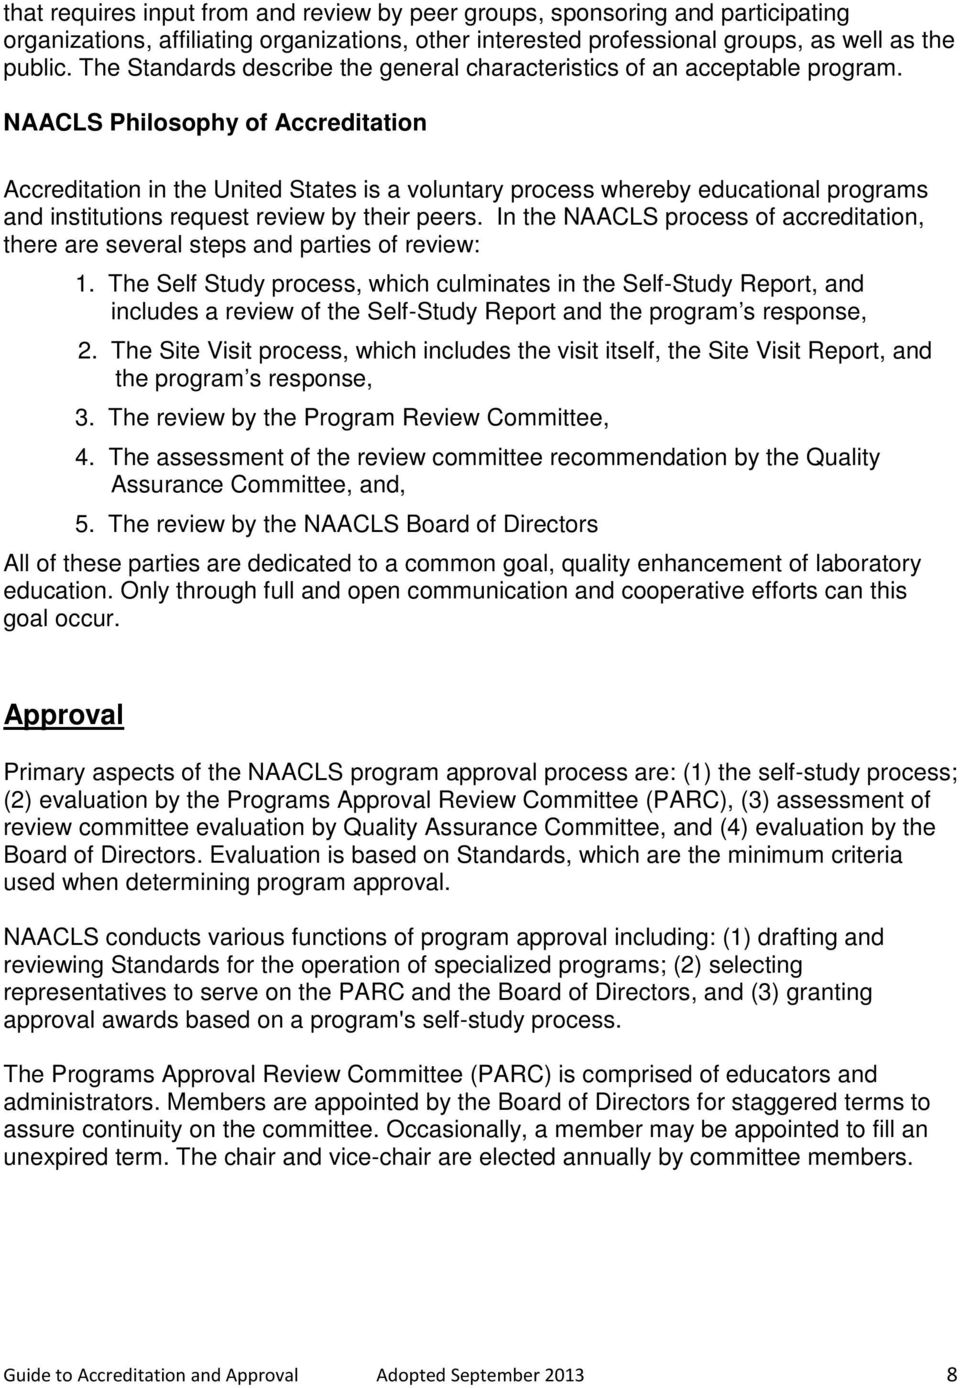 NAACLS Philosophy of Accreditation Accreditation in the United States is a voluntary process whereby educational programs and institutions request review by their peers.